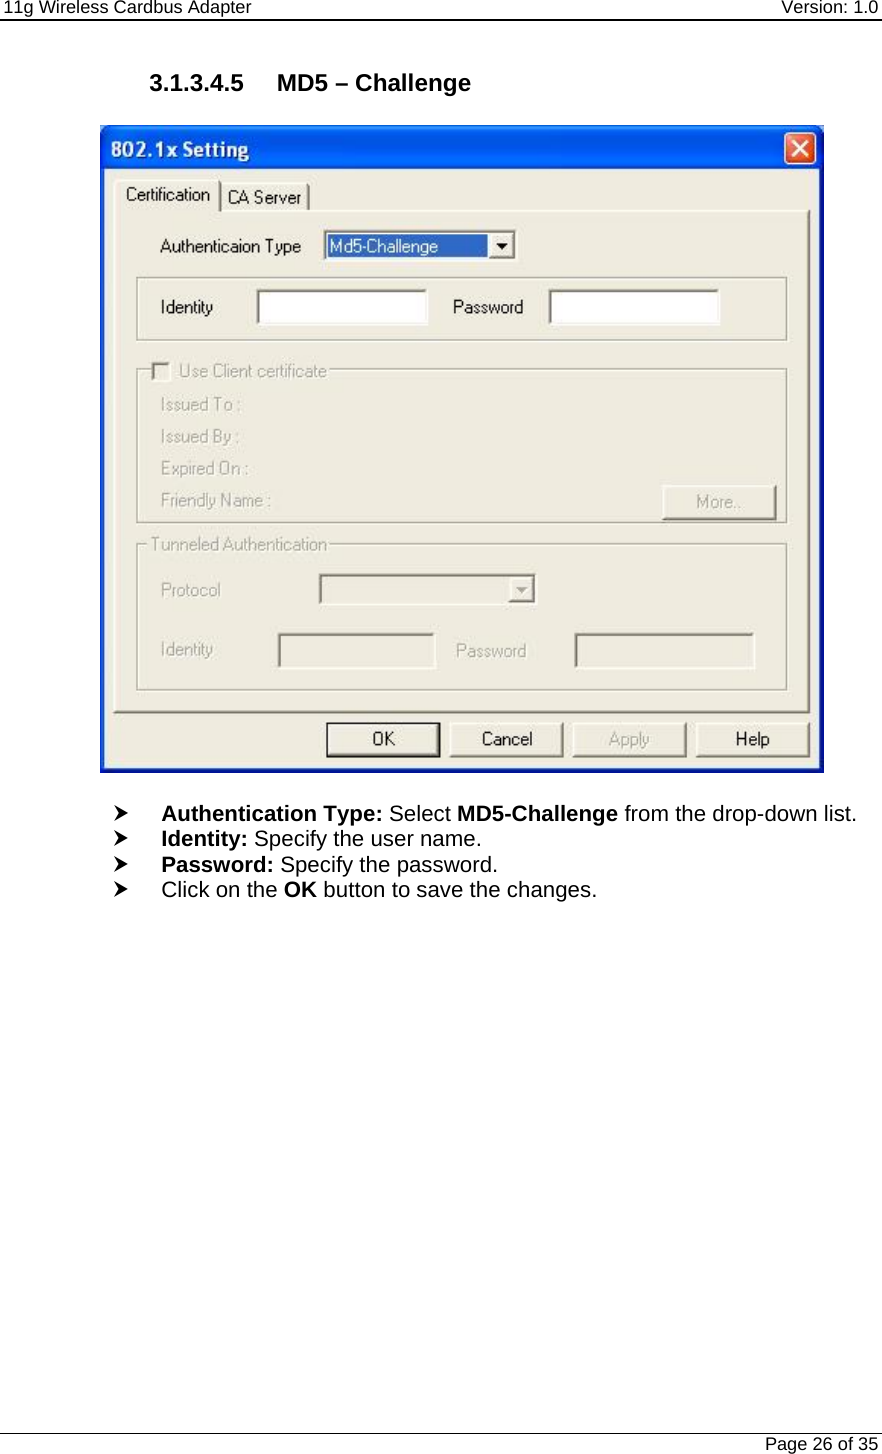 11g Wireless Cardbus Adapter    Version: 1.0   Page 26 of 35 3.1.3.4.5 MD5 – Challenge     h Authentication Type: Select MD5-Challenge from the drop-down list.  h Identity: Specify the user name.  h Password: Specify the password.  h Click on the OK button to save the changes.         